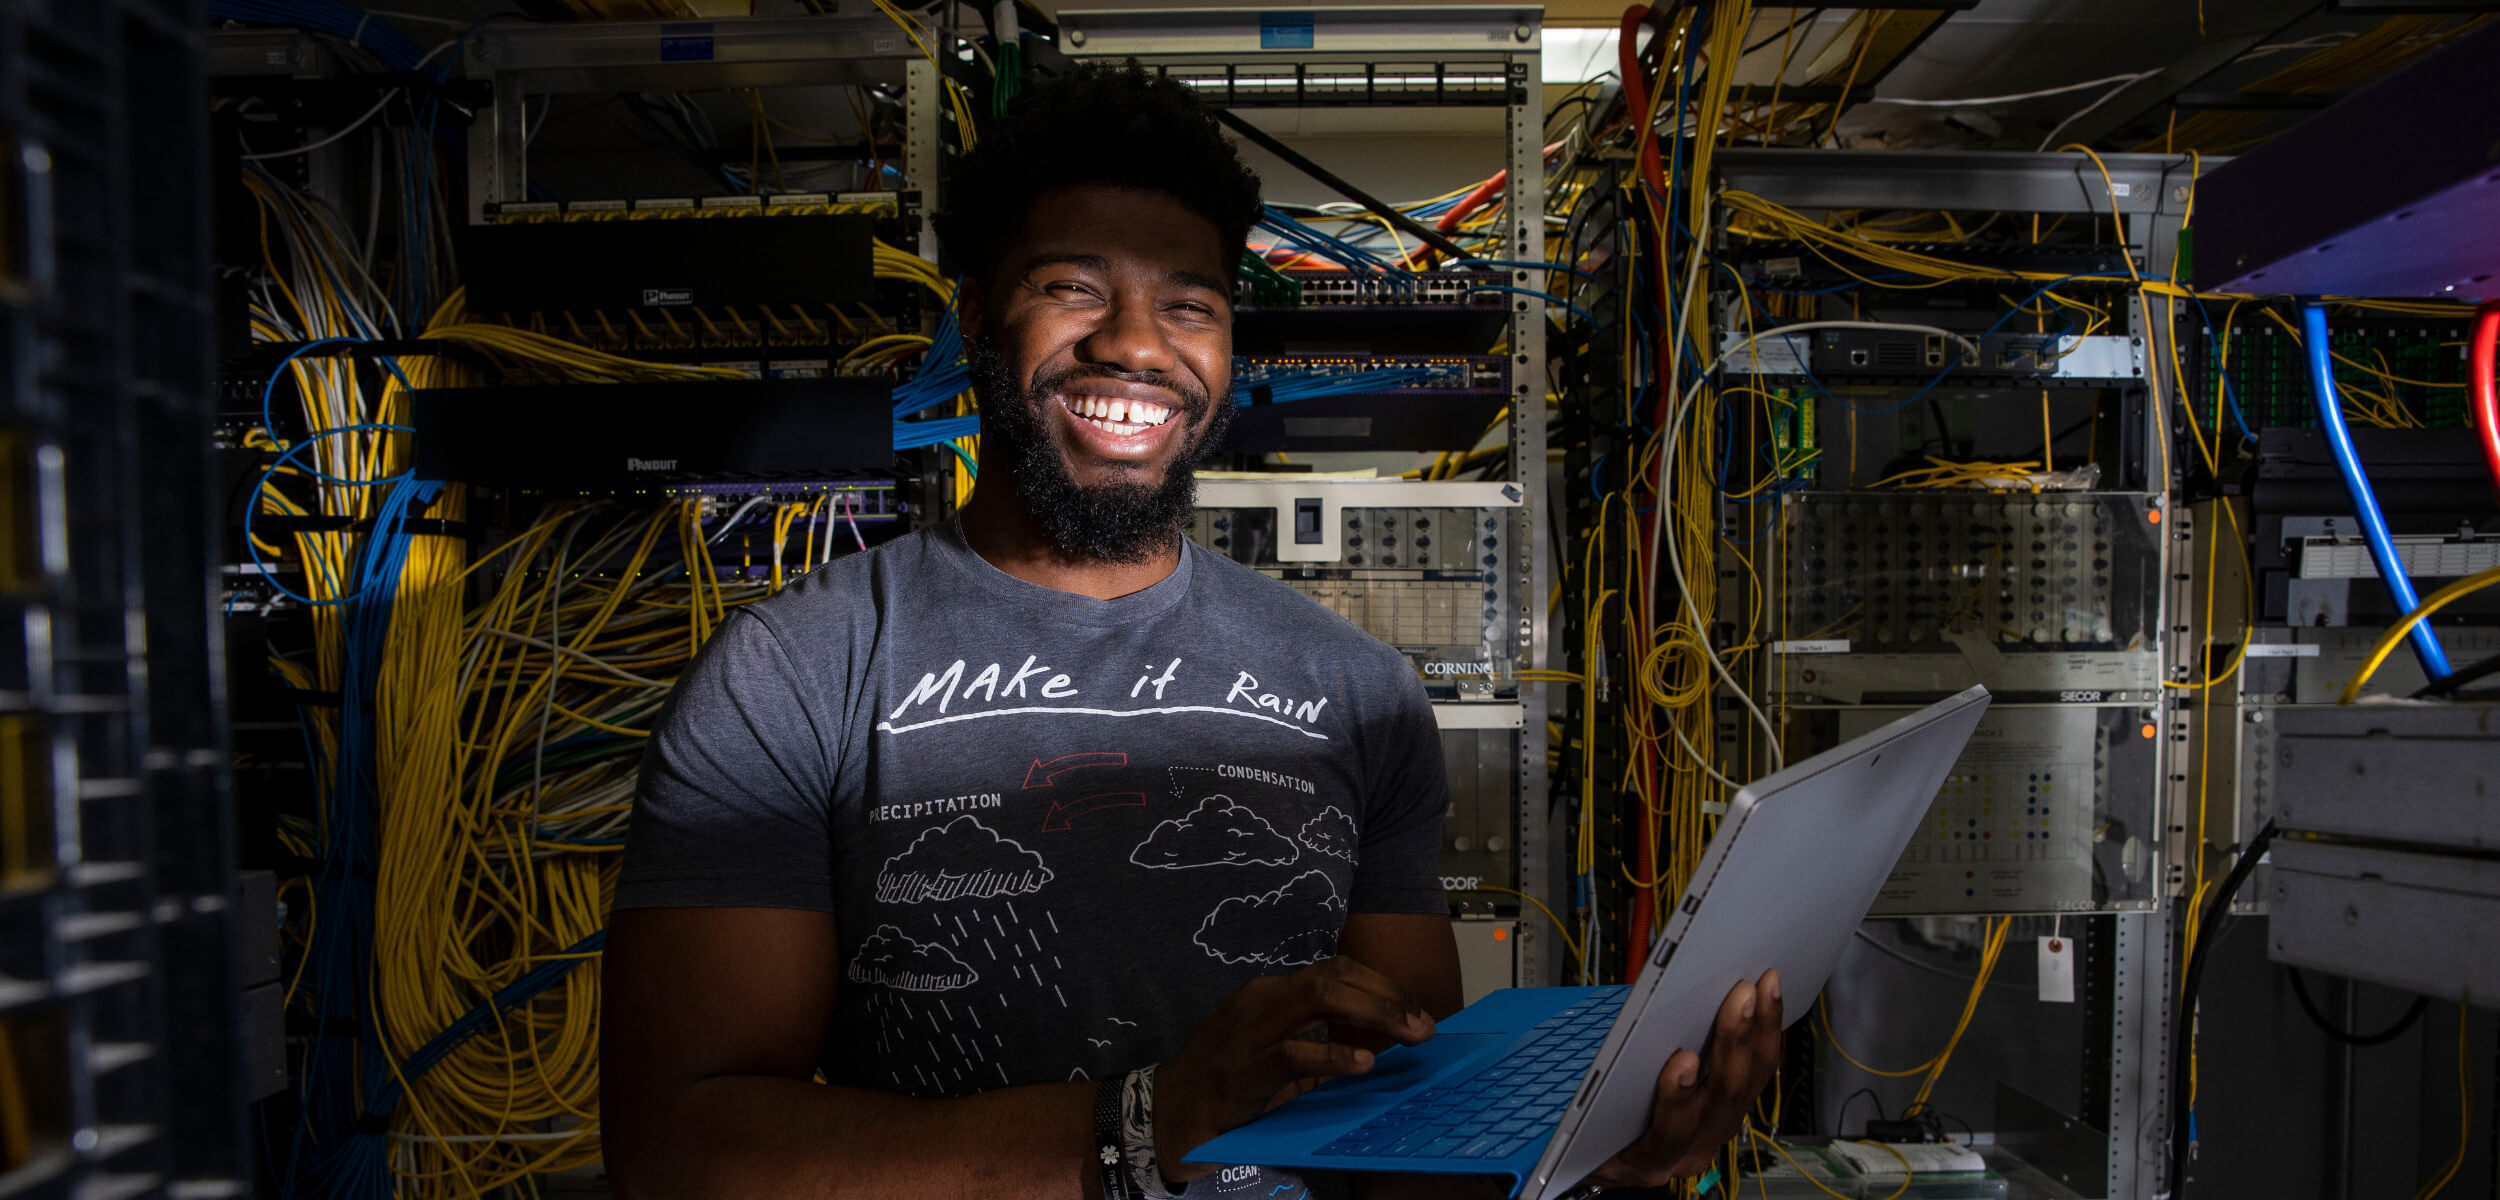 Student standing in server room smiling.